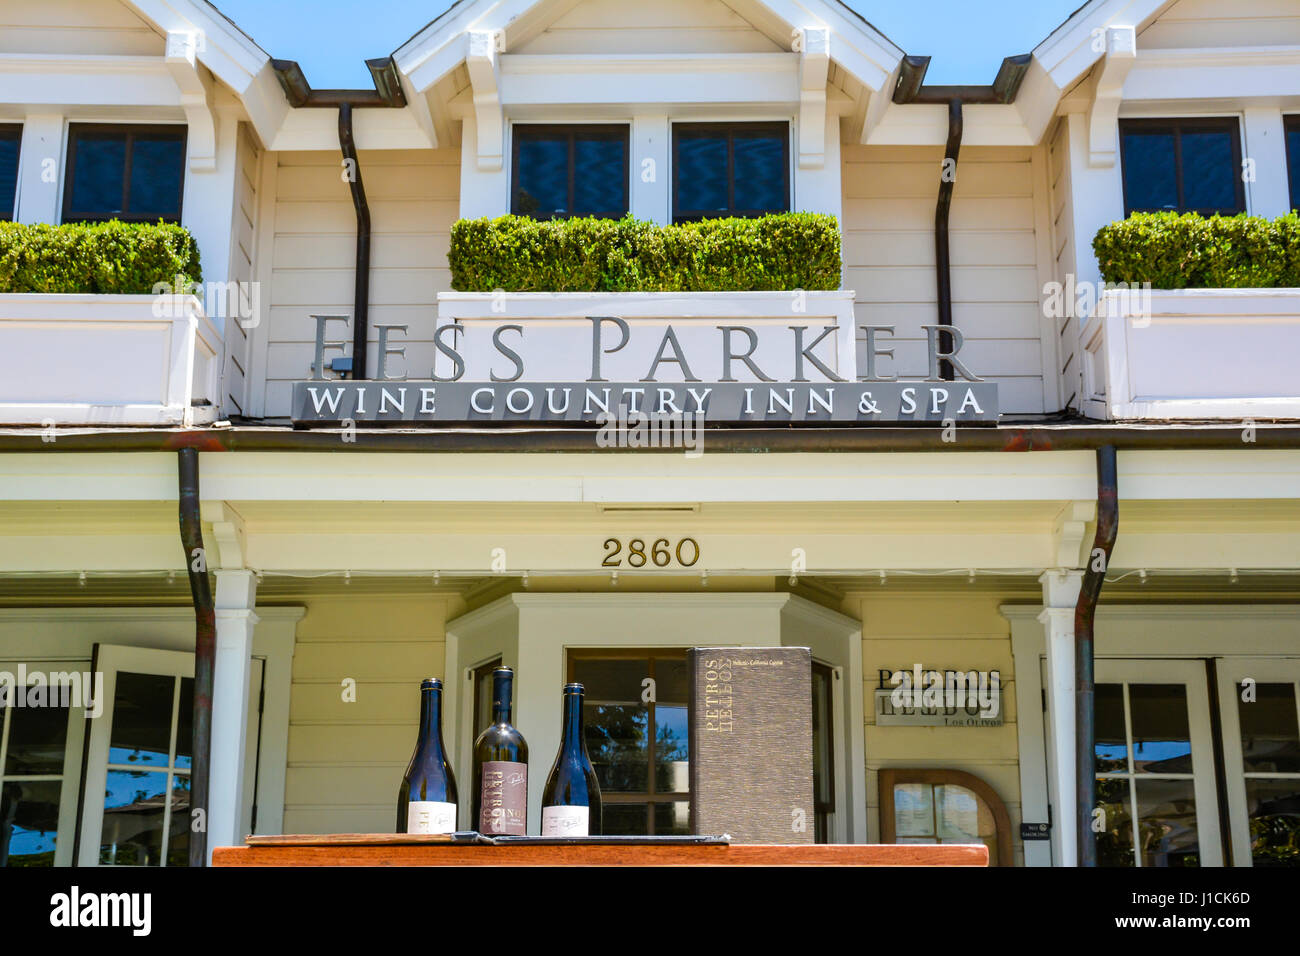 The Fess Parker Wine Country Inn & Spa is a well appointed, upscale hotel in the heart of Santa Ynez Valley wine country,  in Los Olivos, CA Stock Photo